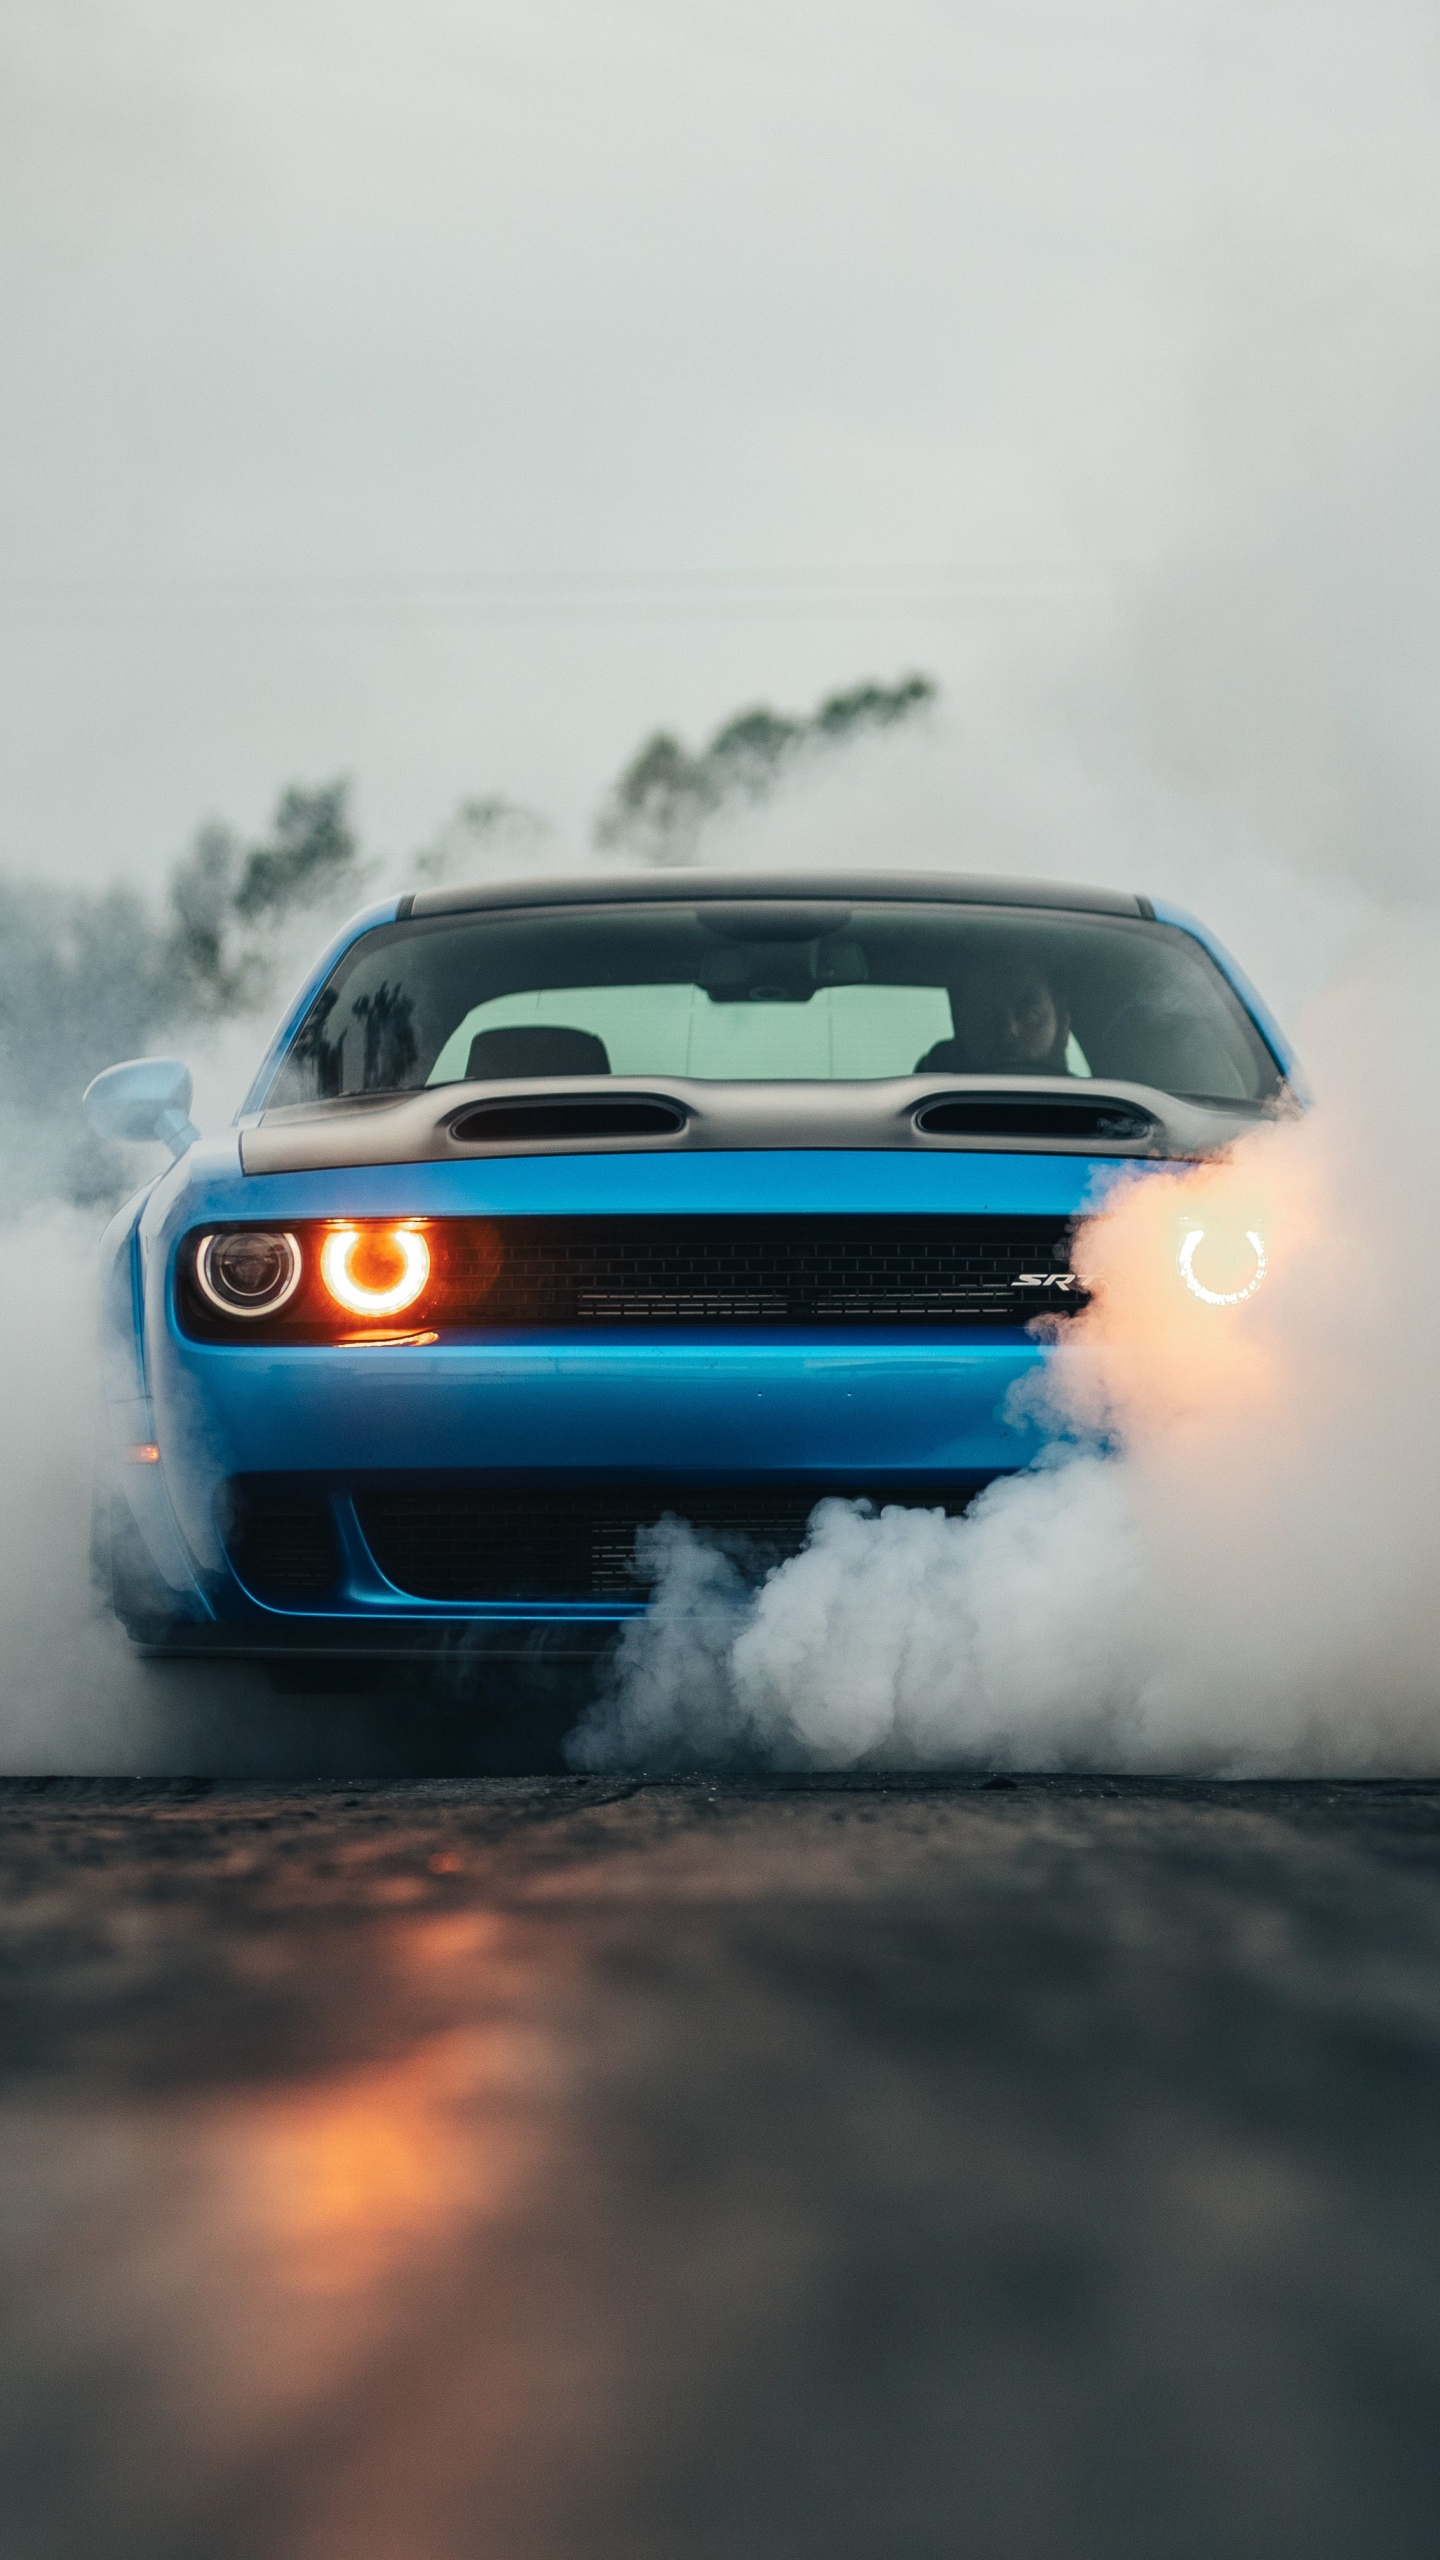 android dodge challenger, muscle car, dodge challenger srt hellcat, dodge challenger srt, vehicles, dodge, car